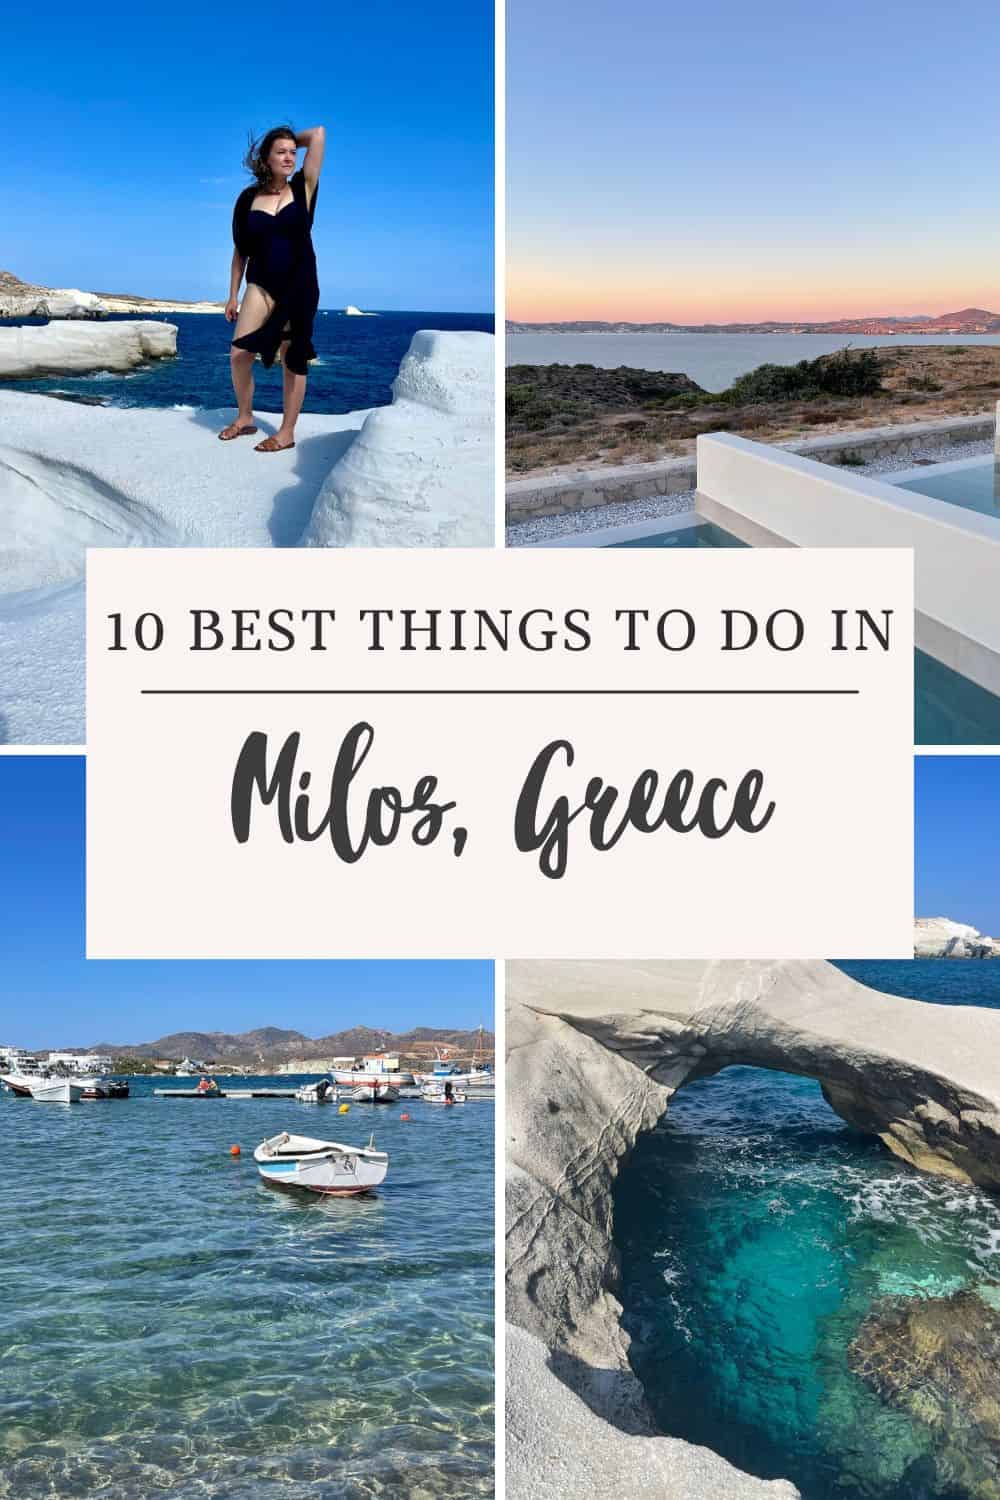 Milos, Greece! 10 Best Things to Do